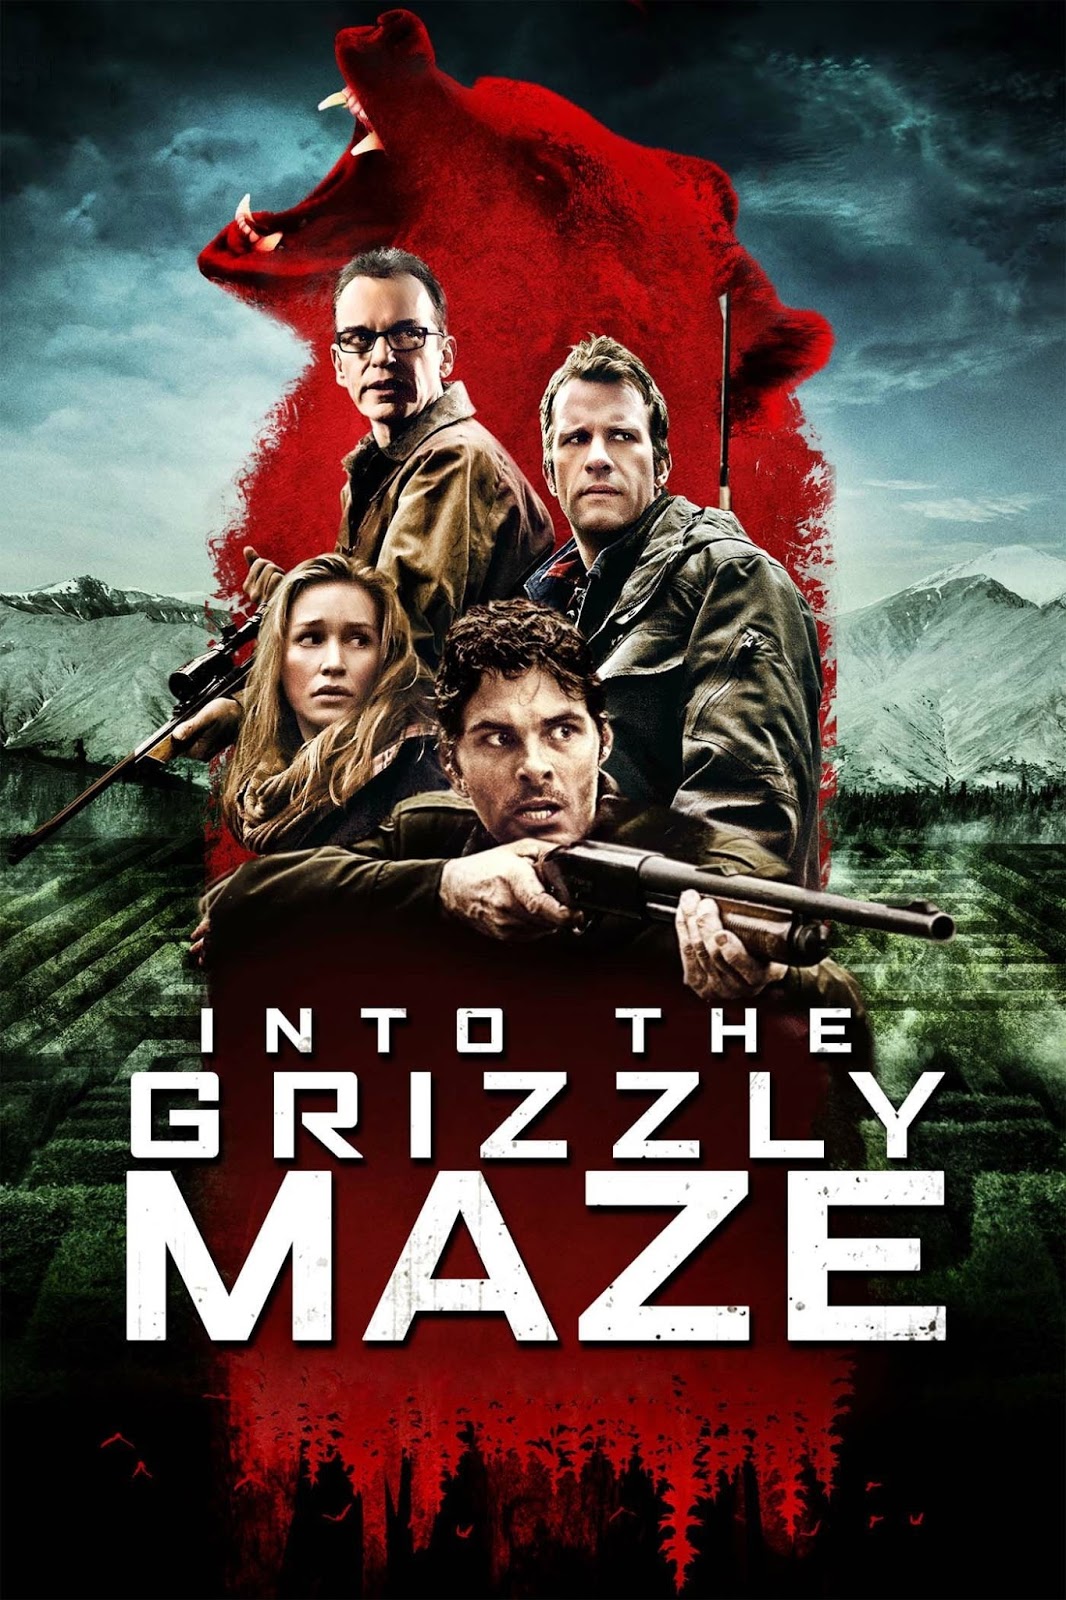 Into the Grizzly Maze 2015 - Full (HD)